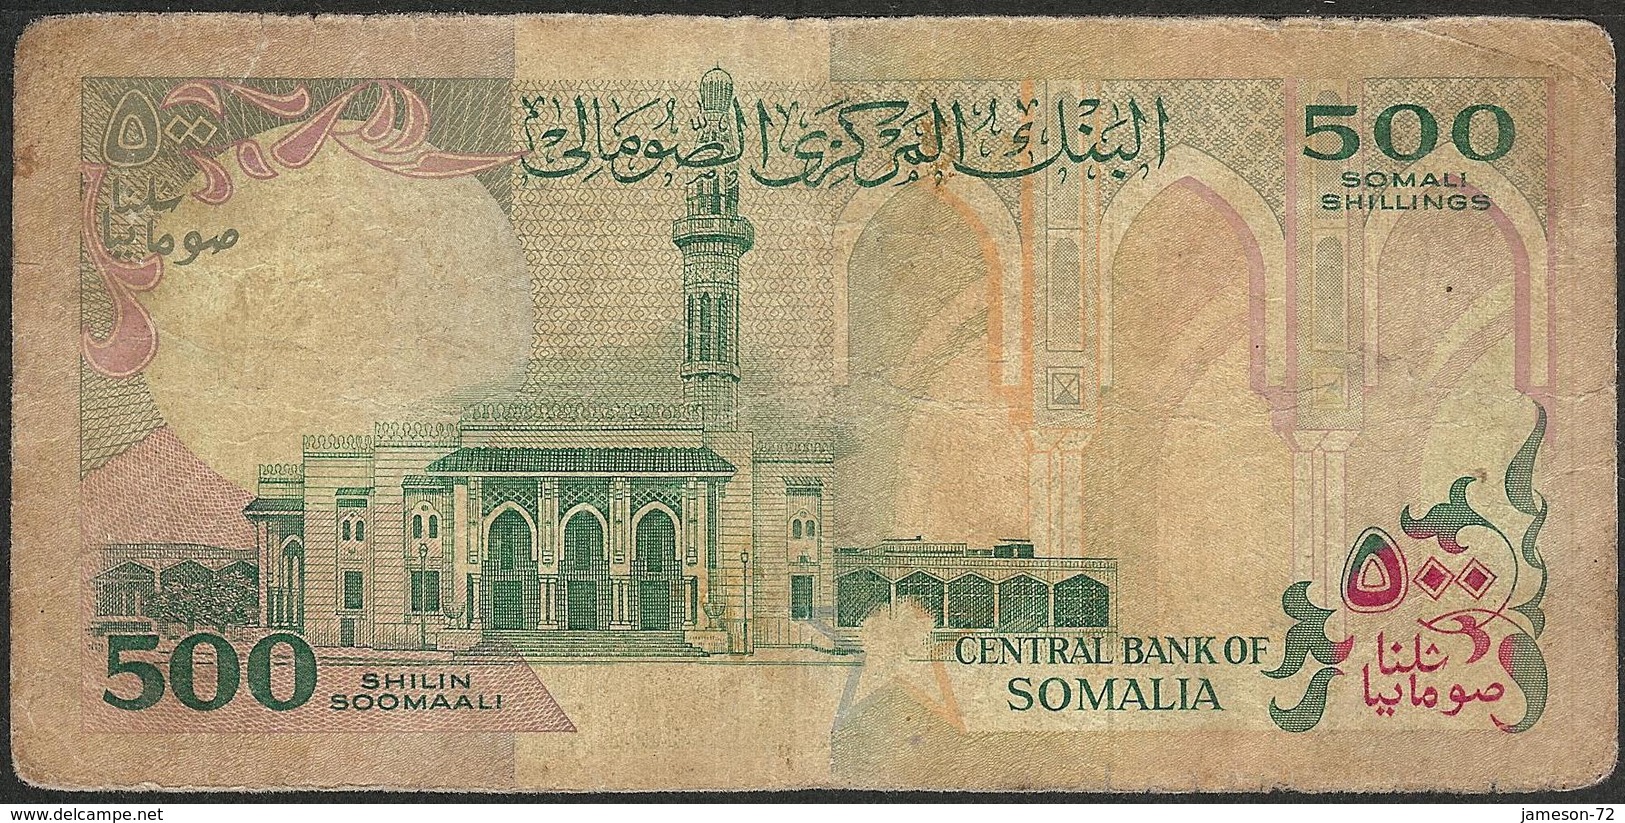 SOMALIA - 500 Shillings 1989 P# 36a Africa Banknote - Edelweiss Coins - Somalia